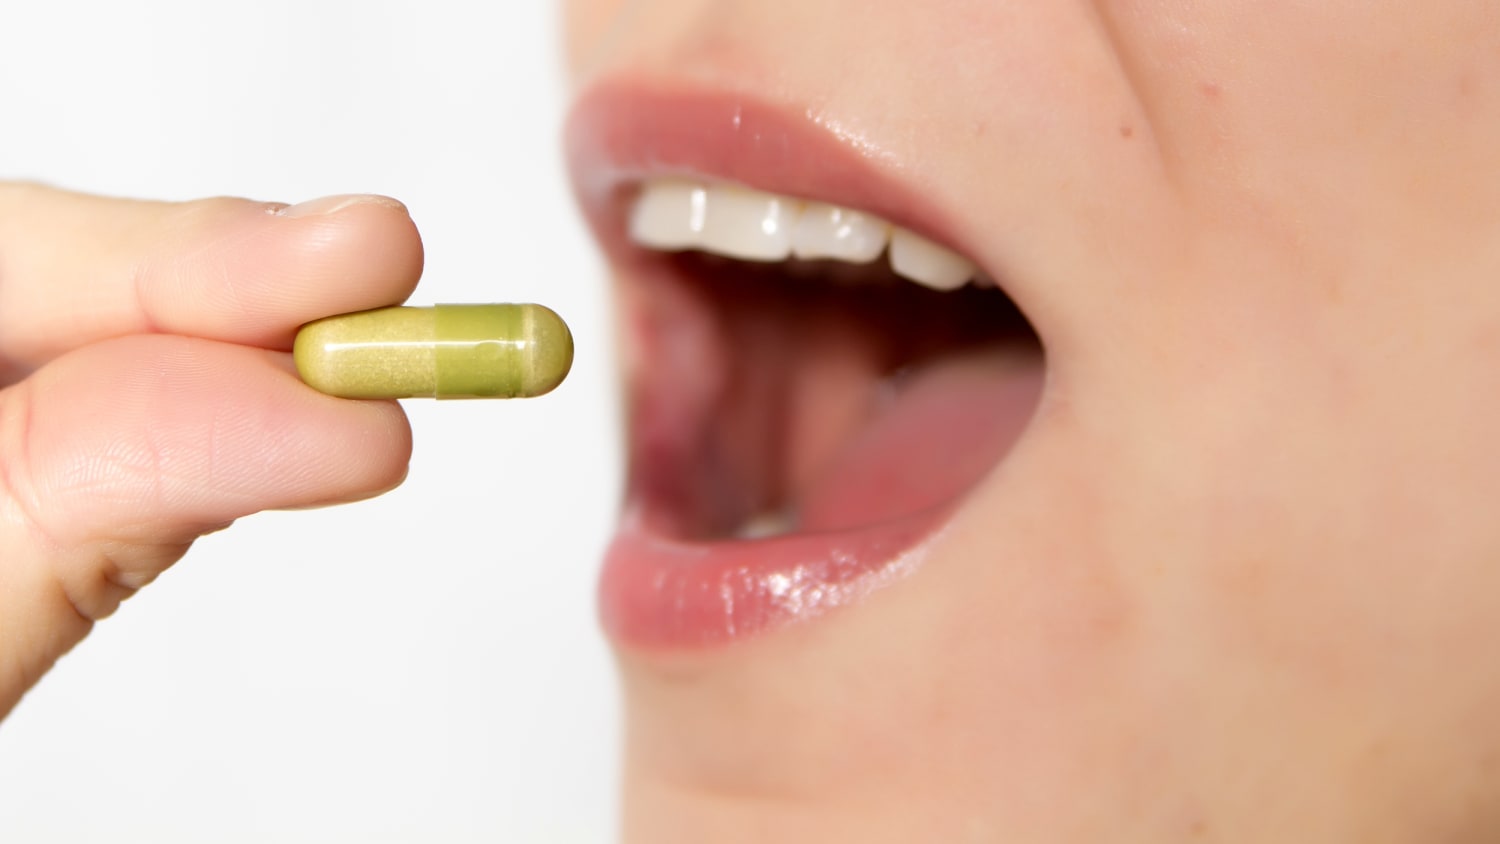 Nysgerrighed perspektiv Andet 7 tips to make swallowing pills easier